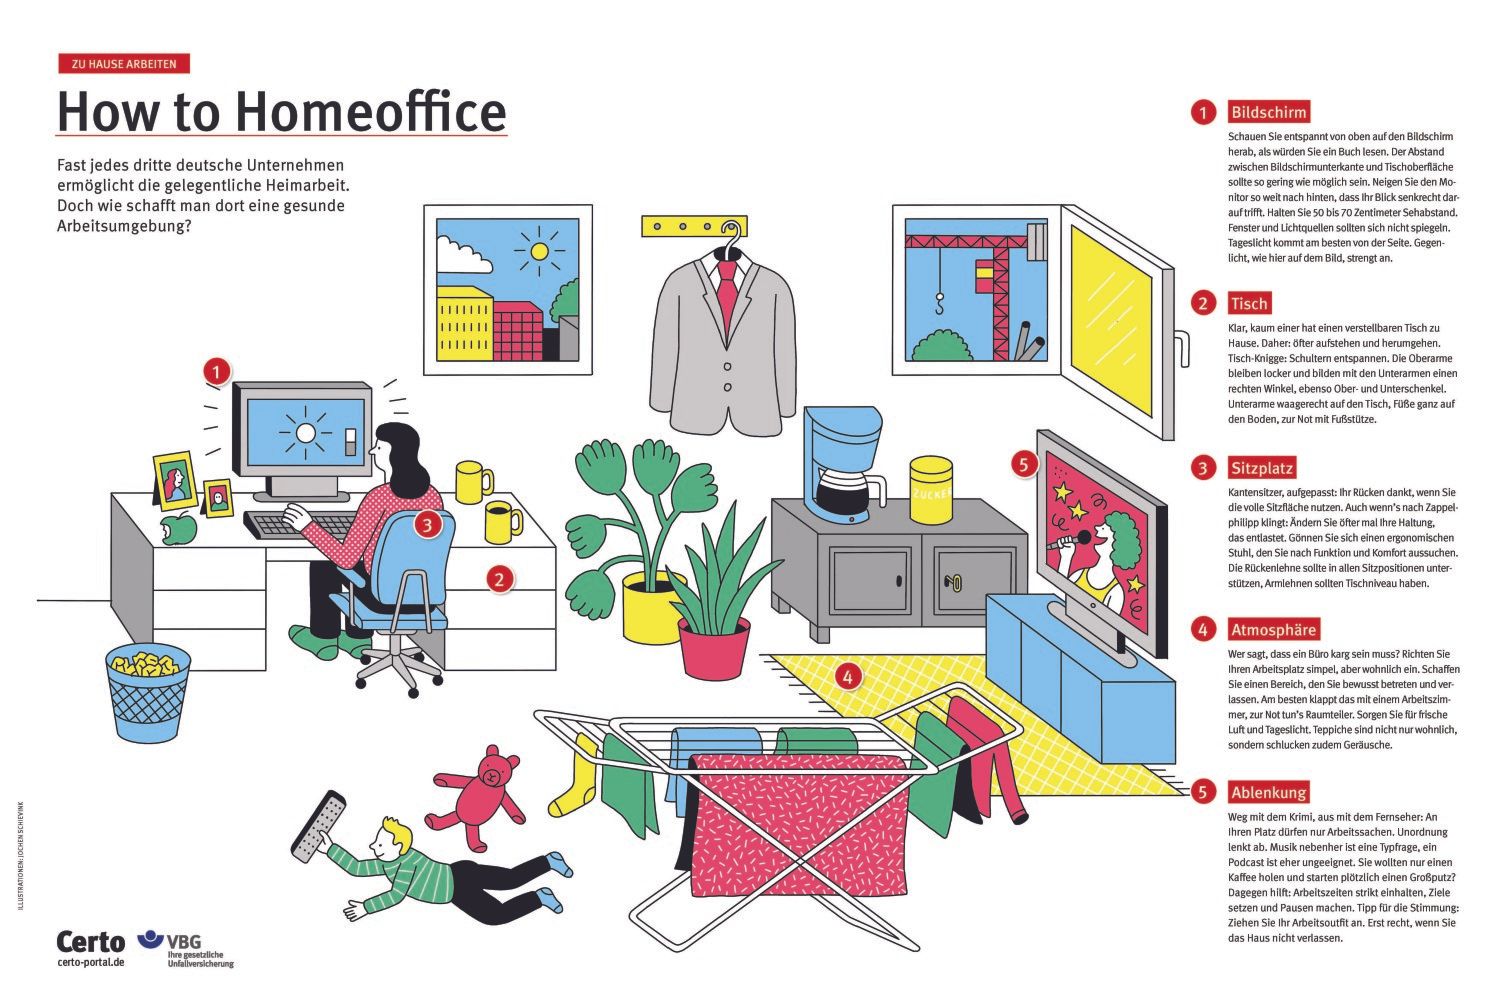 VBG: Plakat how to Homeoffice